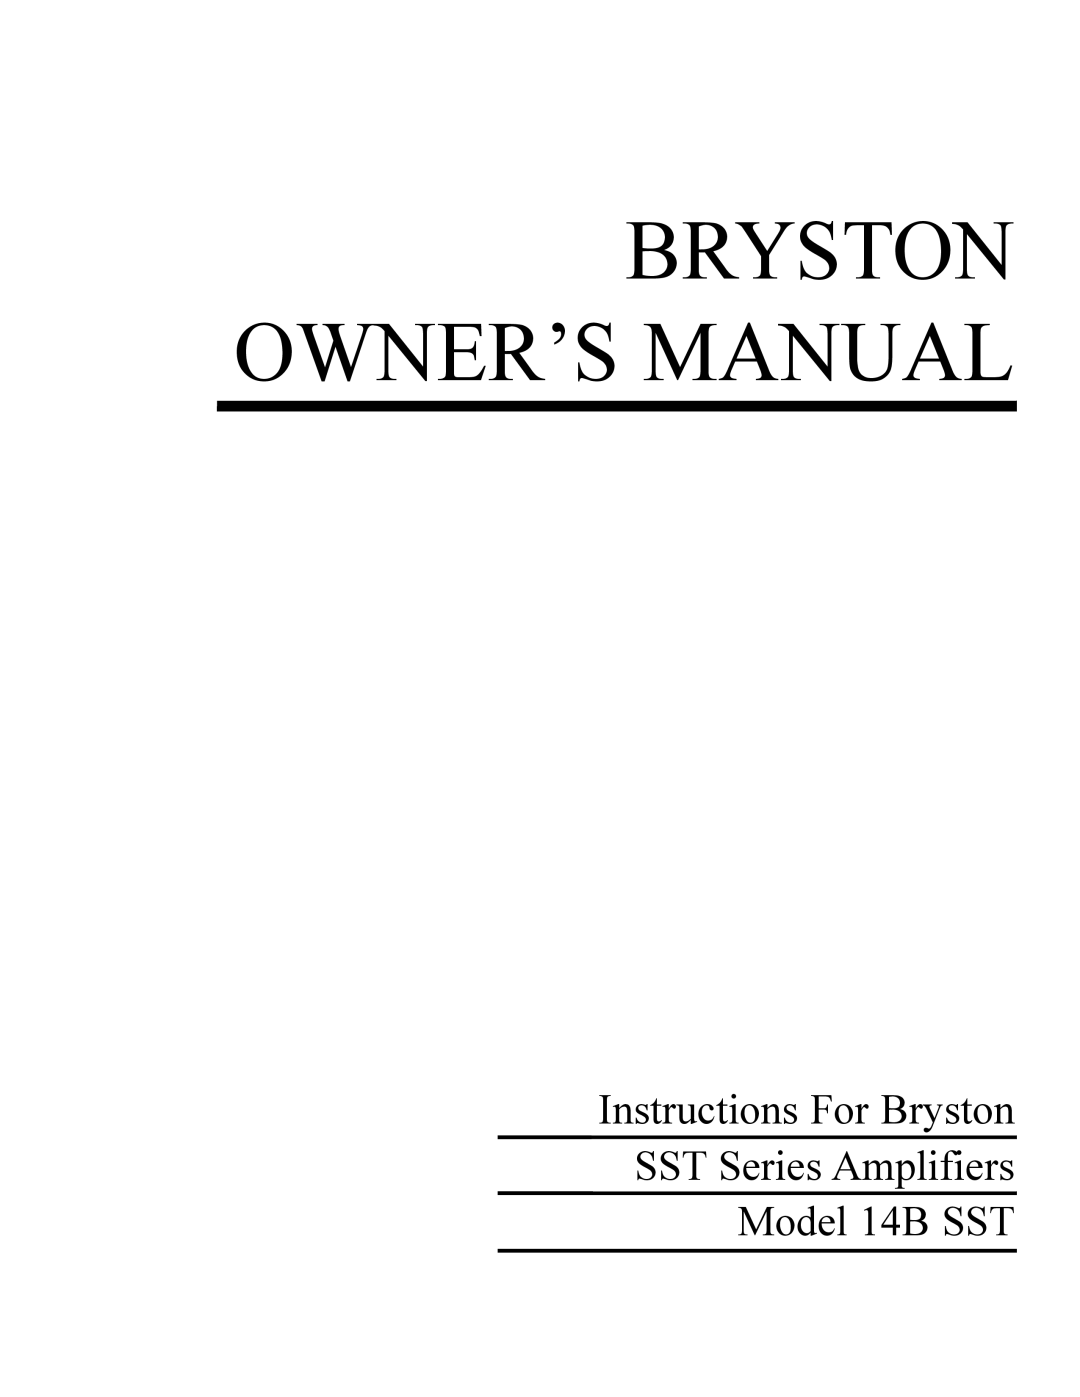 Bryston owner manual Instructions For Bryston SST Series Amplifiers, Model 14B SST 